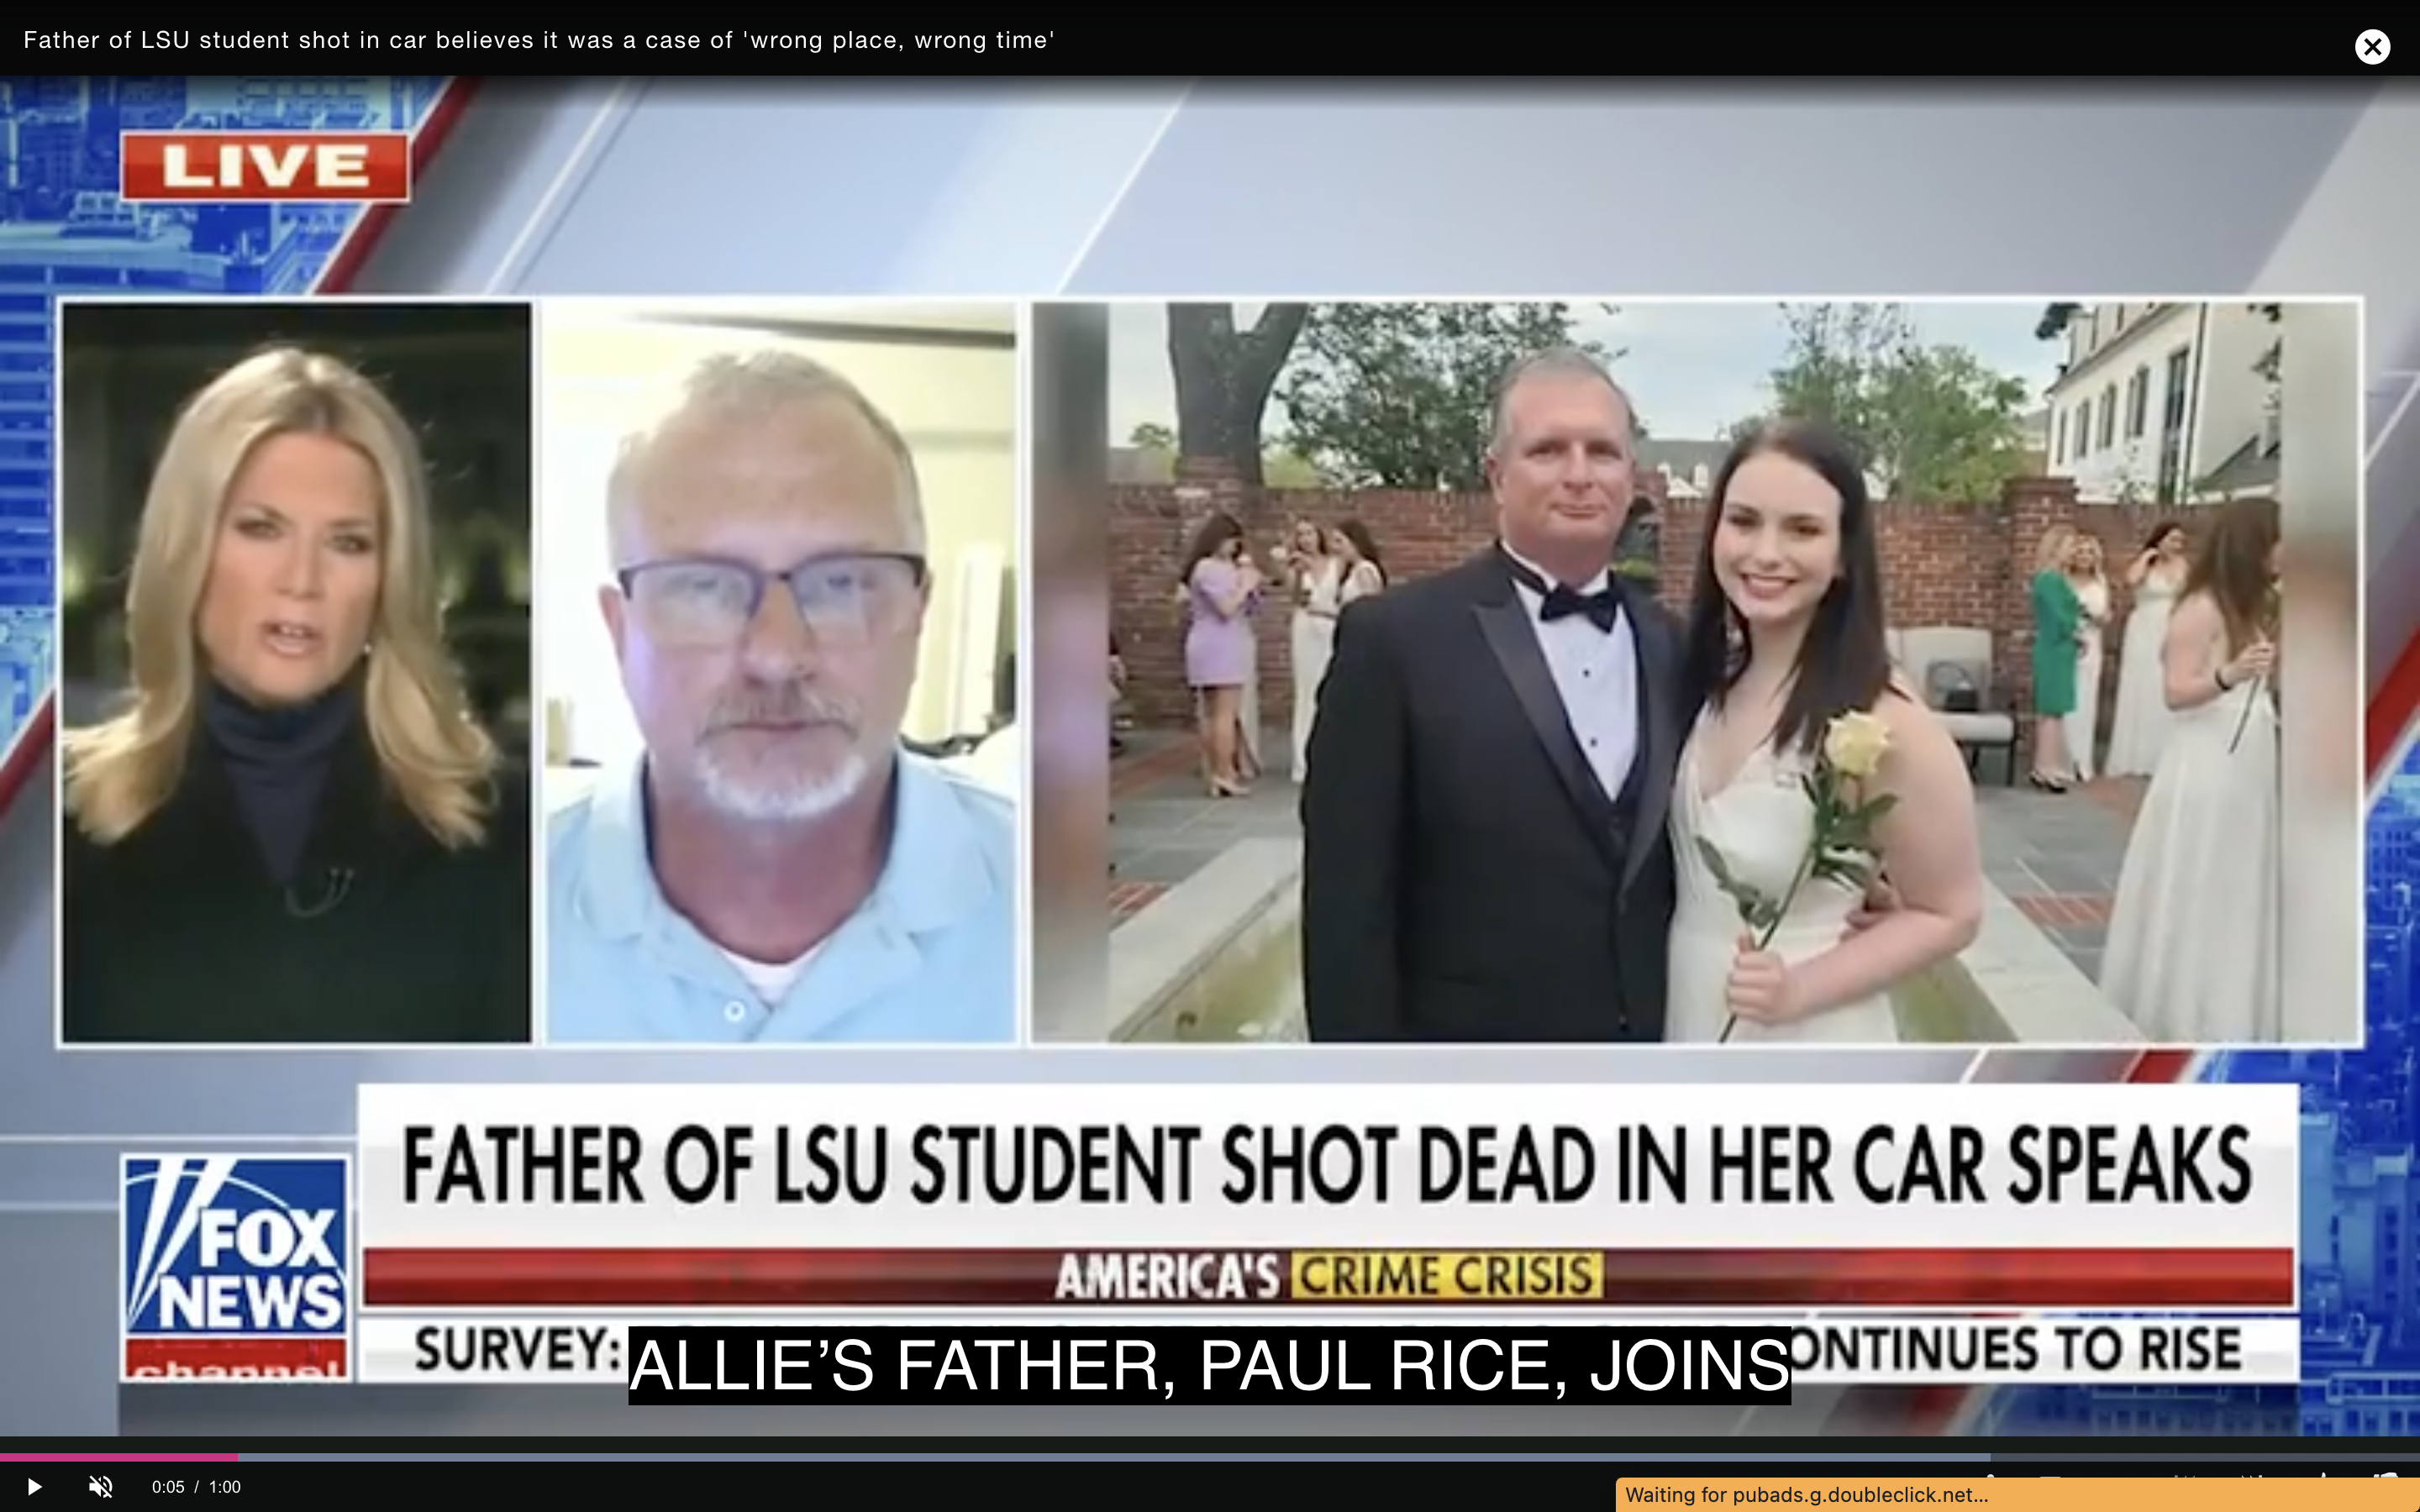 Father of LSU Student shot Dead